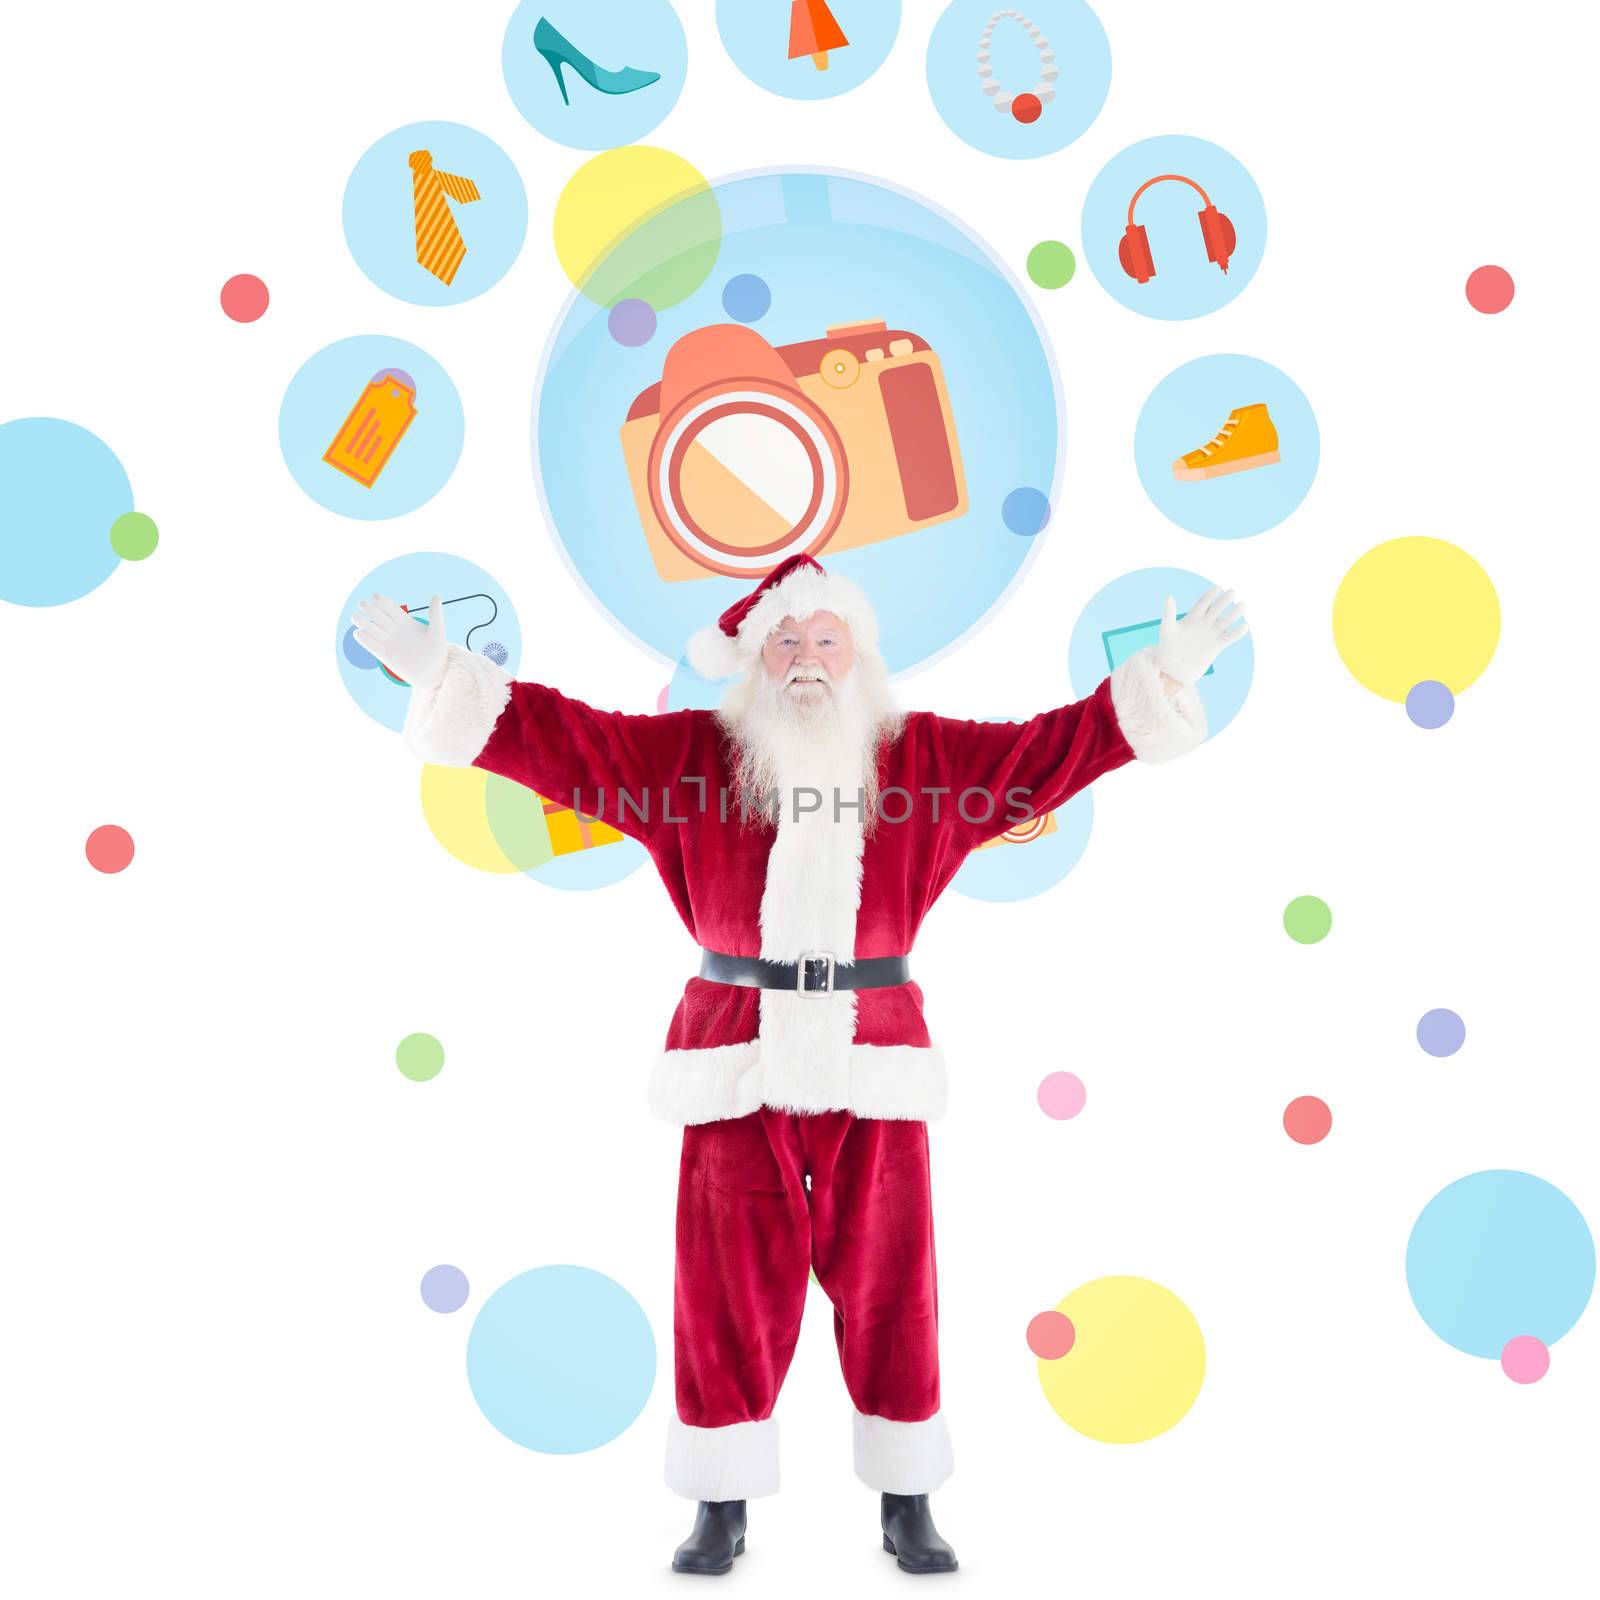 Santa with arms out against dot pattern